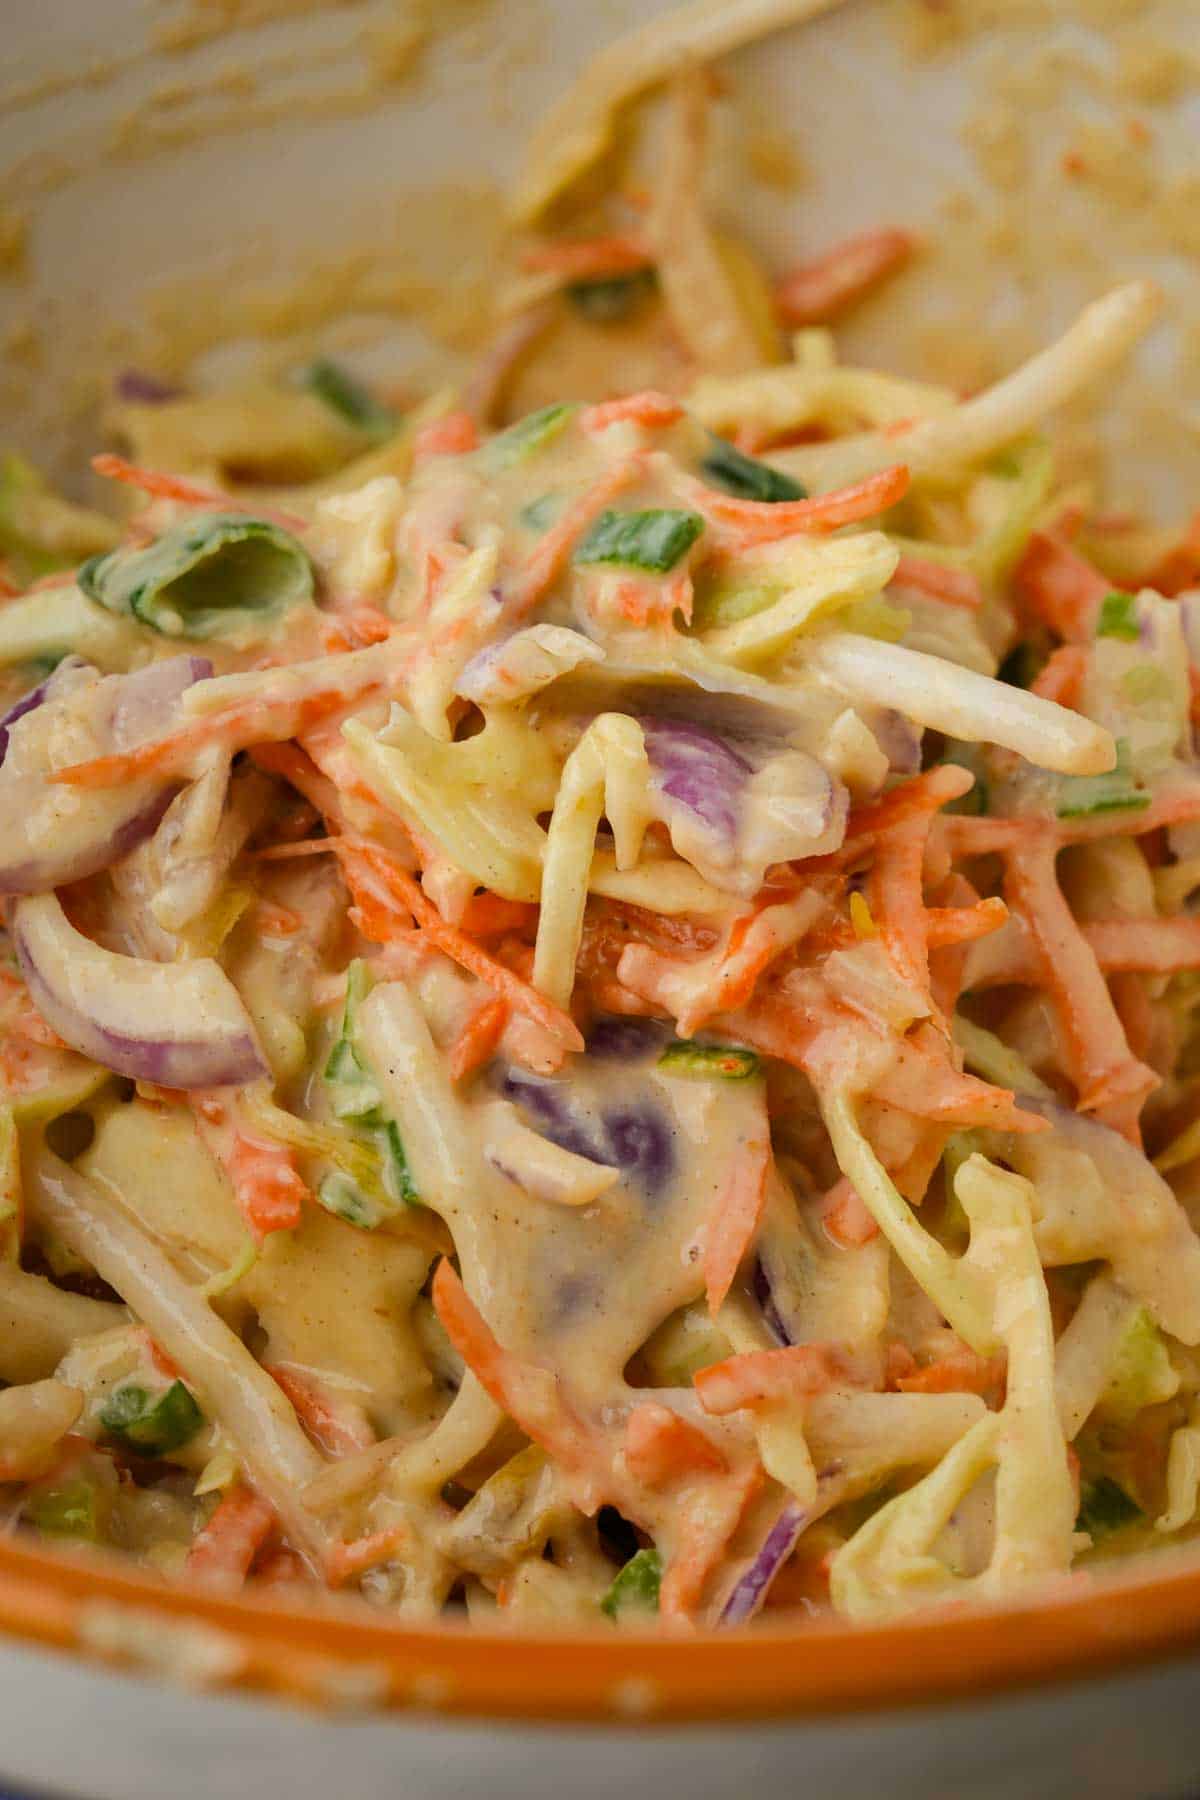 A bowl of julienne cut vegetables with batter mixed into it.